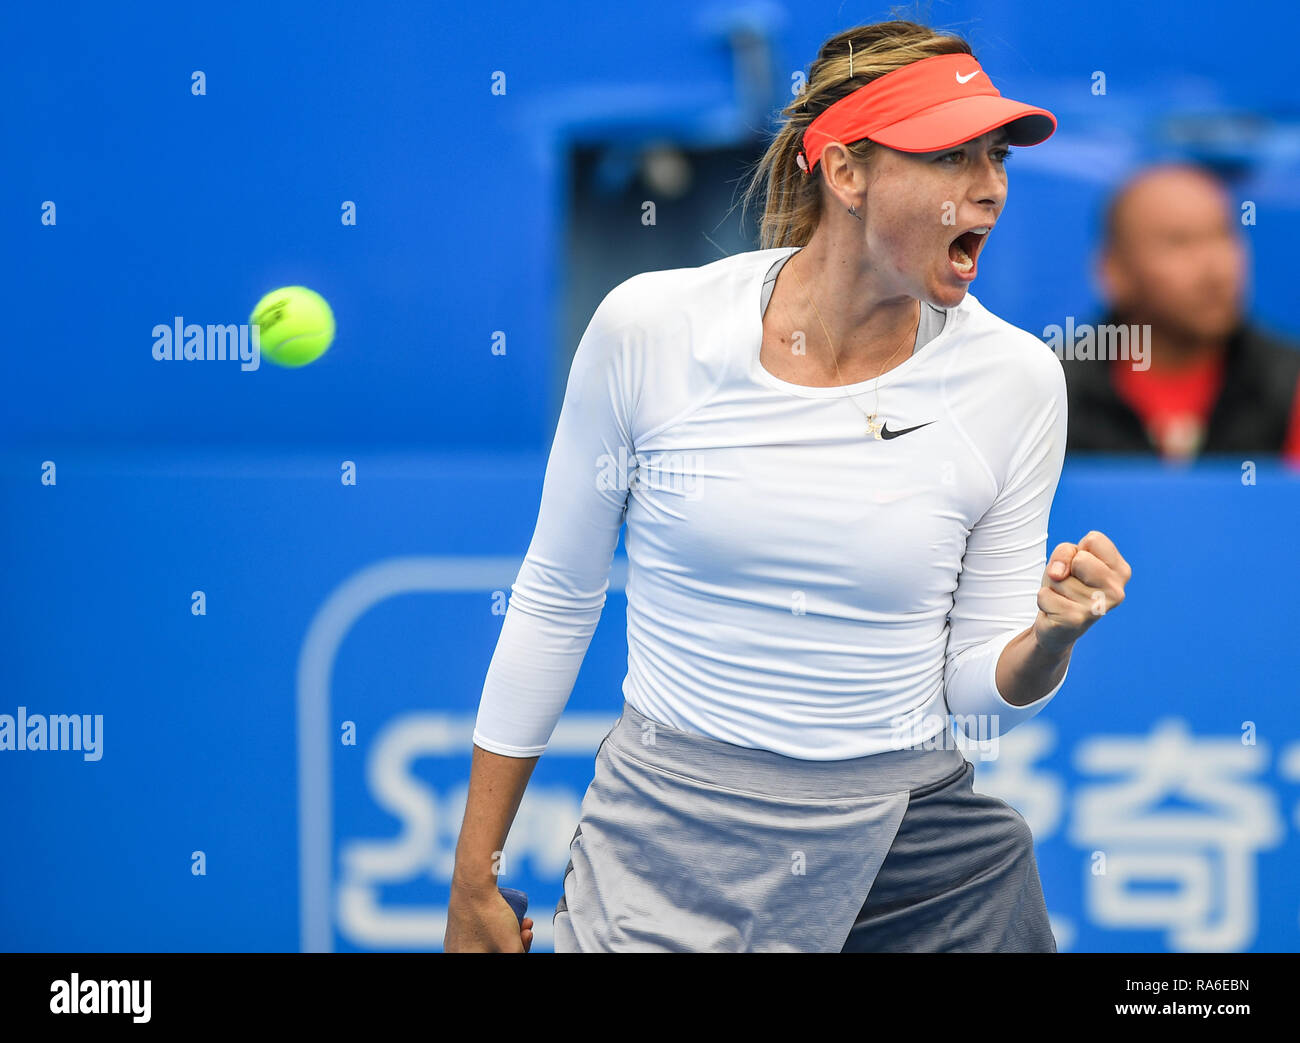 Shenzhen, China's Guangdong Province. 2nd Jan, 2019. Maria Sharapova of  Russia celebrates scoring during the second round match against Wang Xinyu  of China at the WTA Shen Zhen Open tennis tournament in